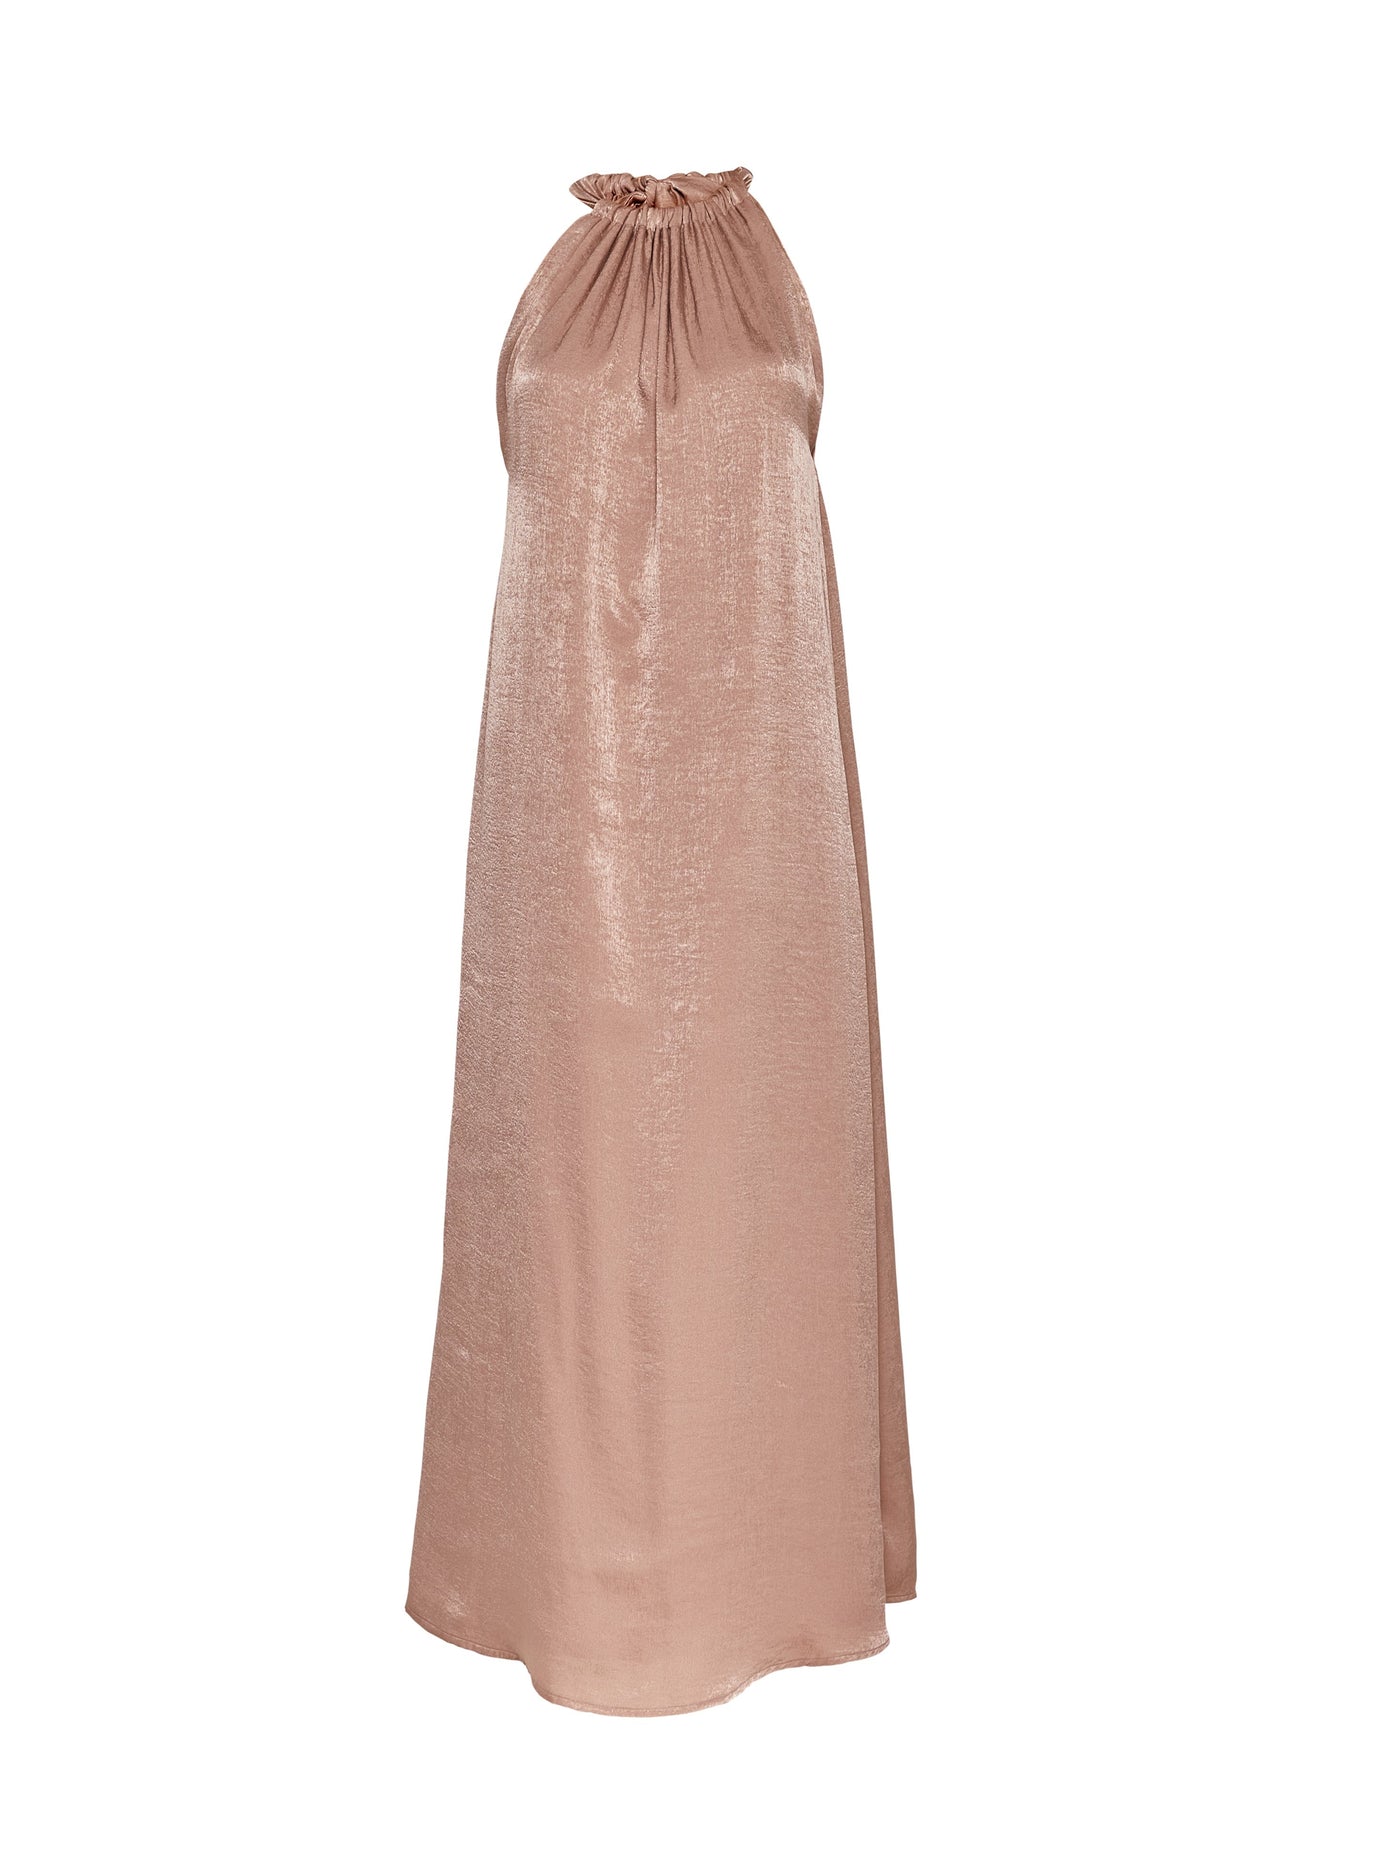 Satin sleeveless Maxi dress in oyster by Cocoove